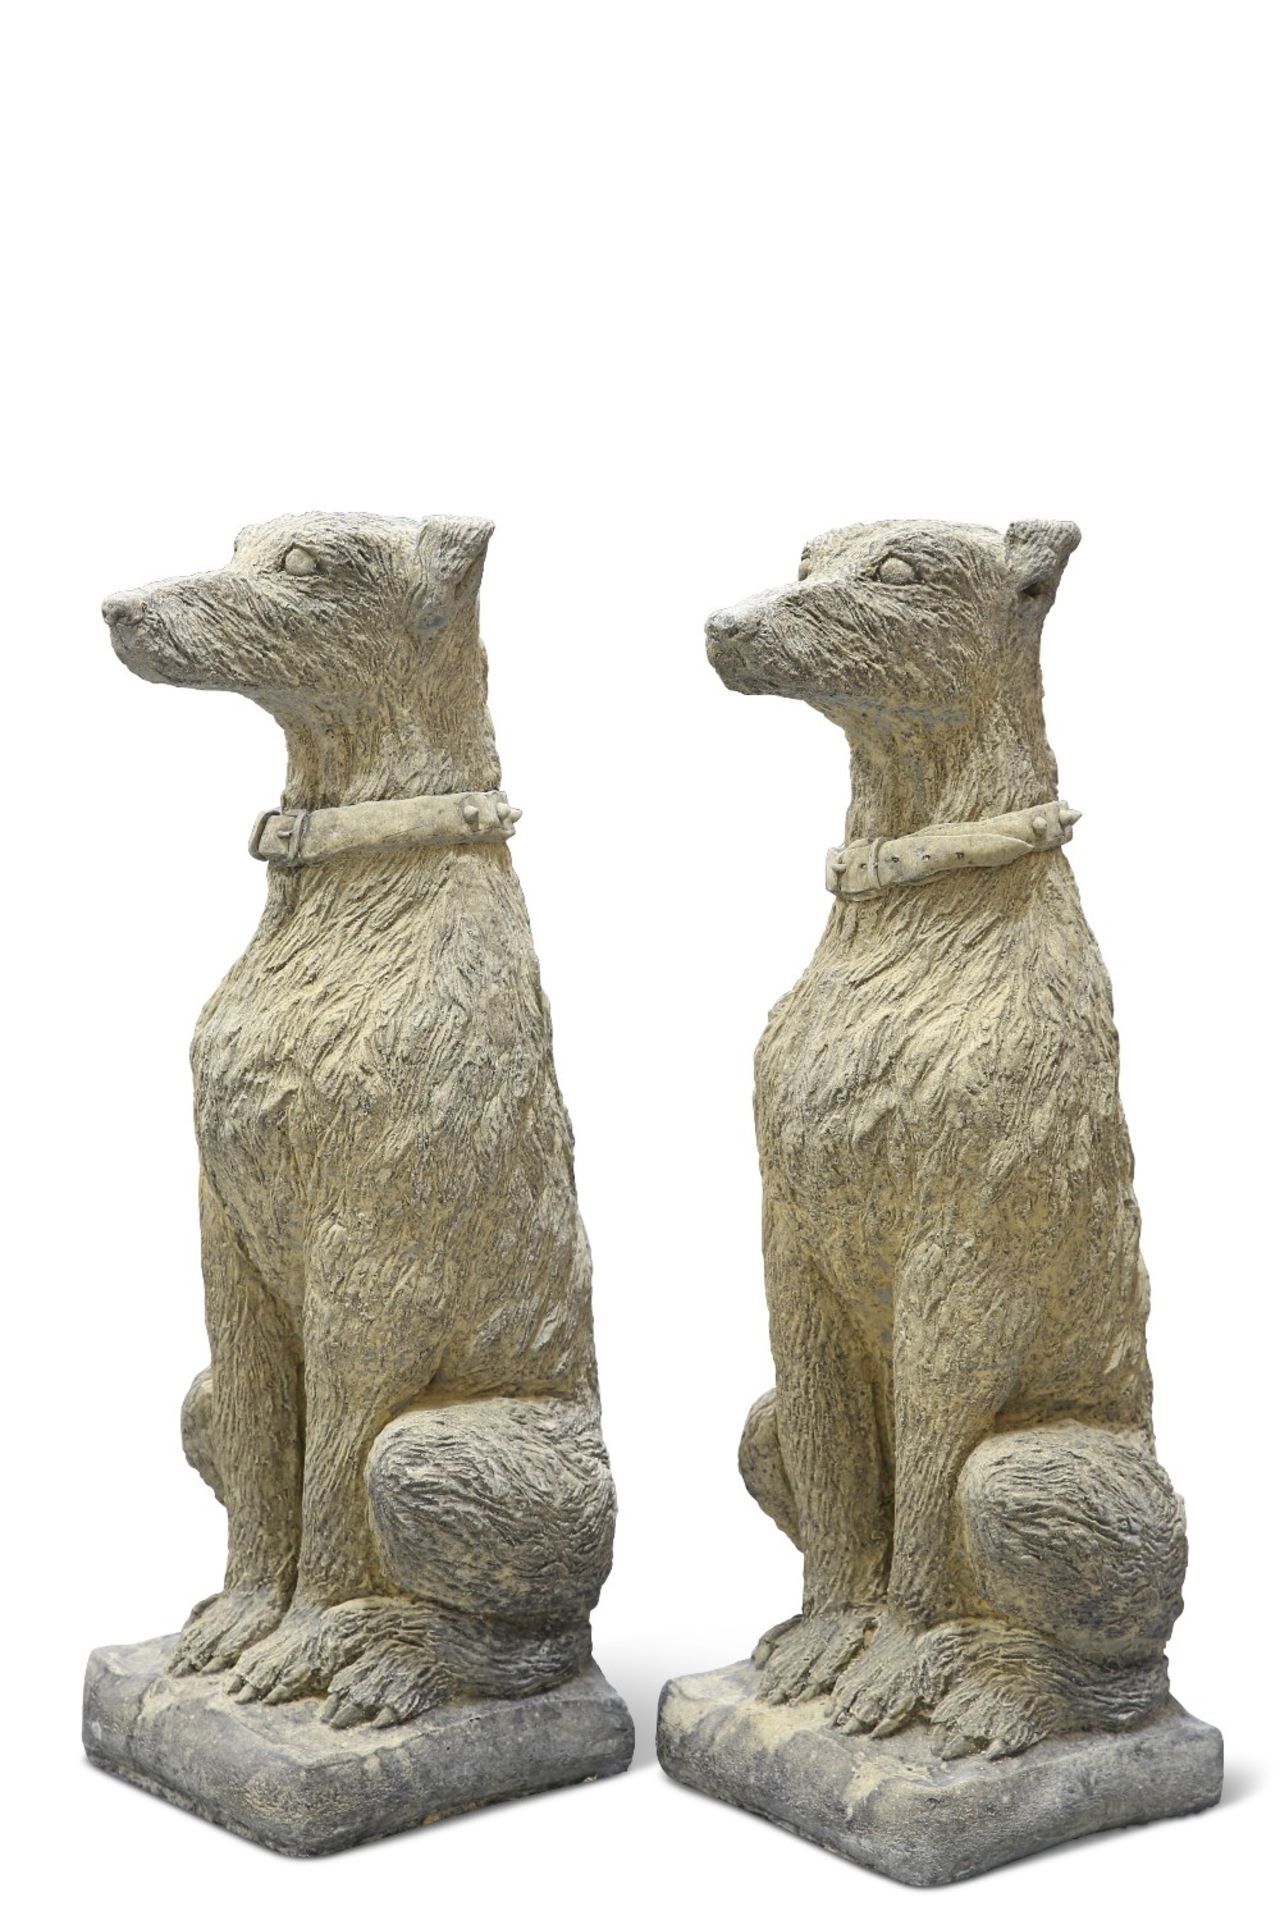 A PAIR OF RECONSTITUTED STONE DEERHOUNDS